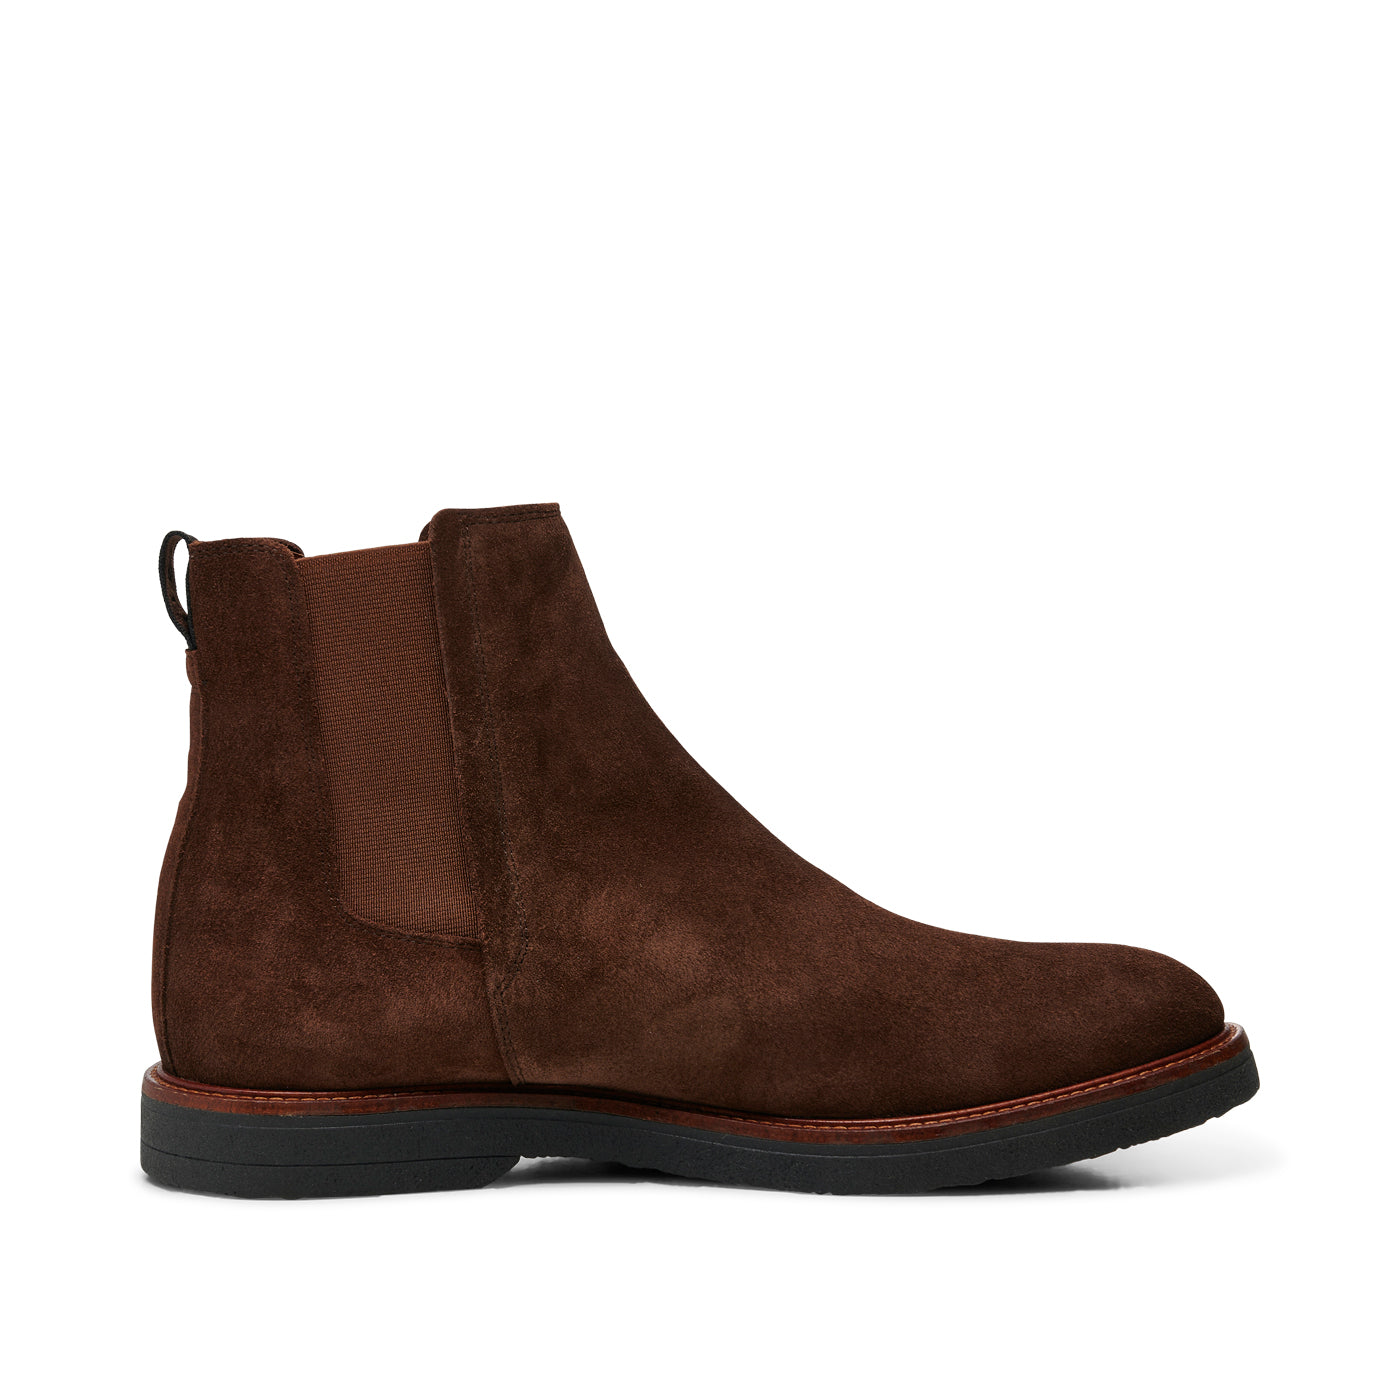 SHOE THE BEAR MENS Kip chelsea boot suede Boots 920 CHOCOLATE